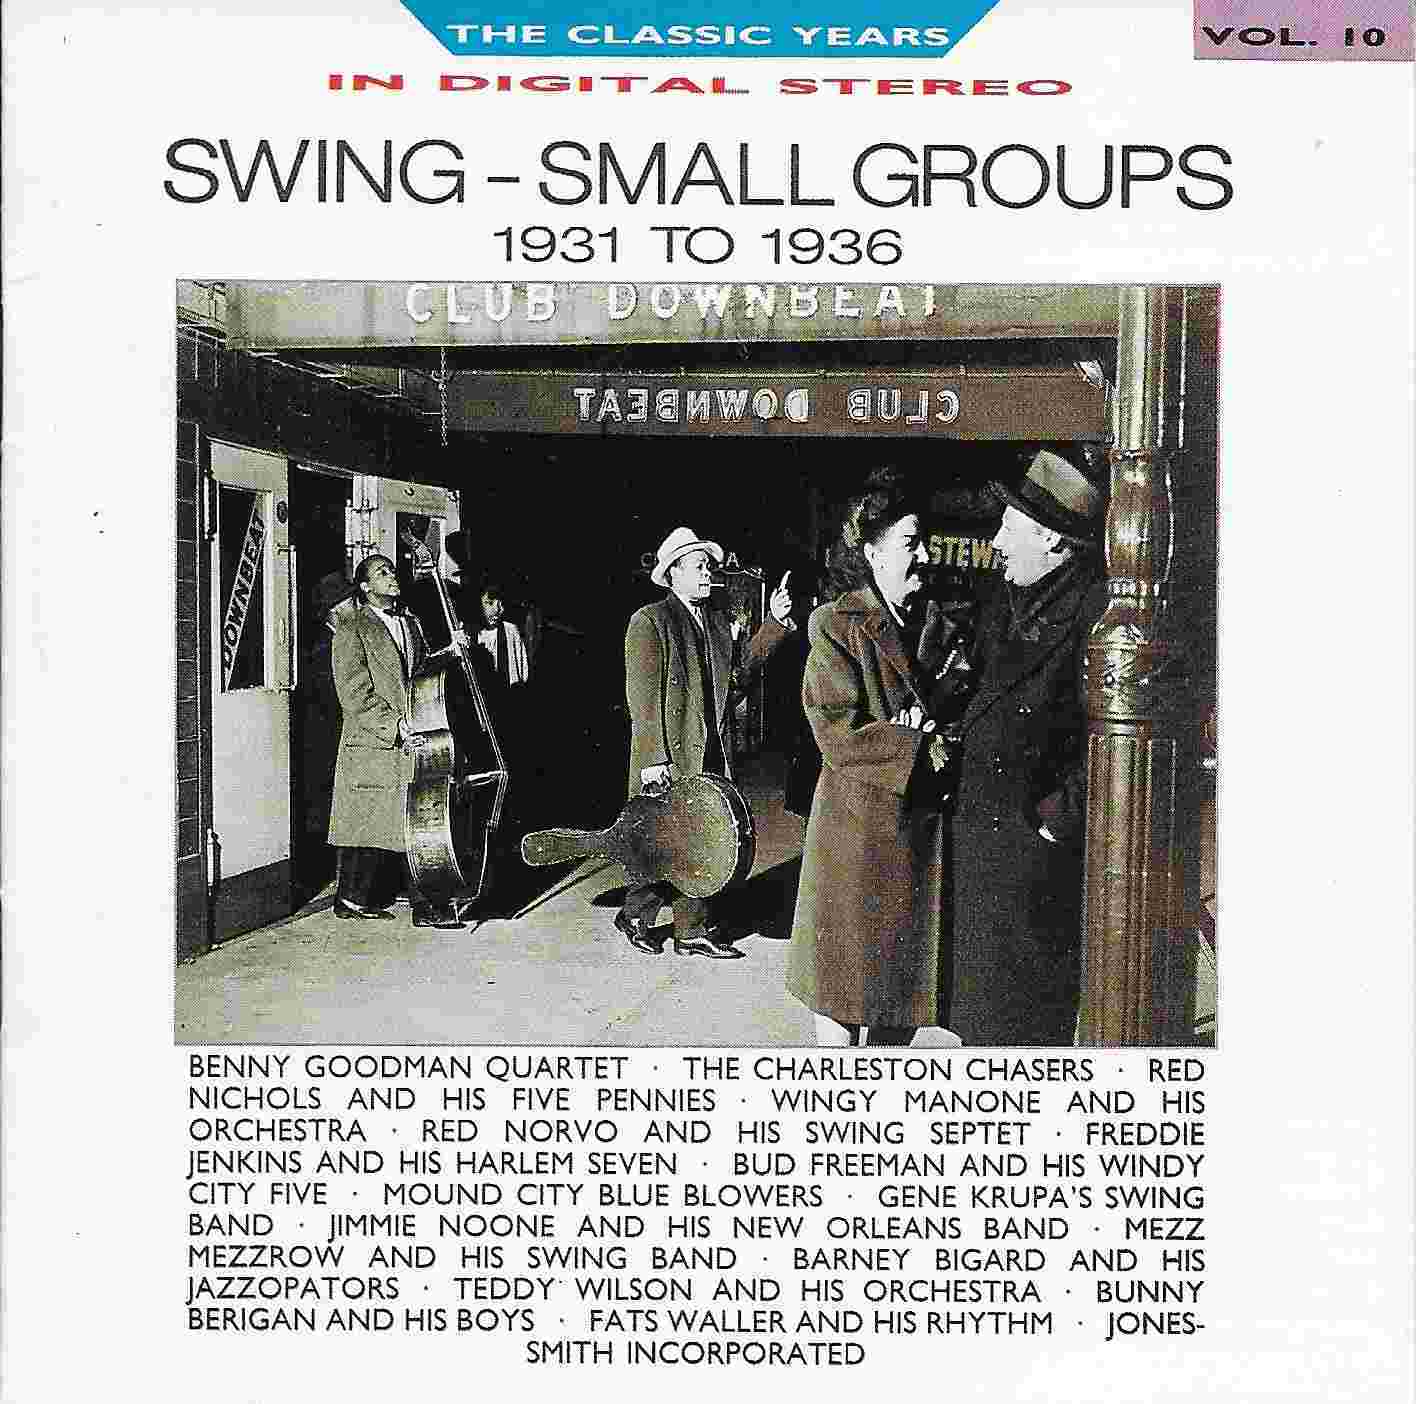 Picture of BBCCD666 Classic years - Volume 10, Swing small groups by artist Various from the BBC cds - Records and Tapes library